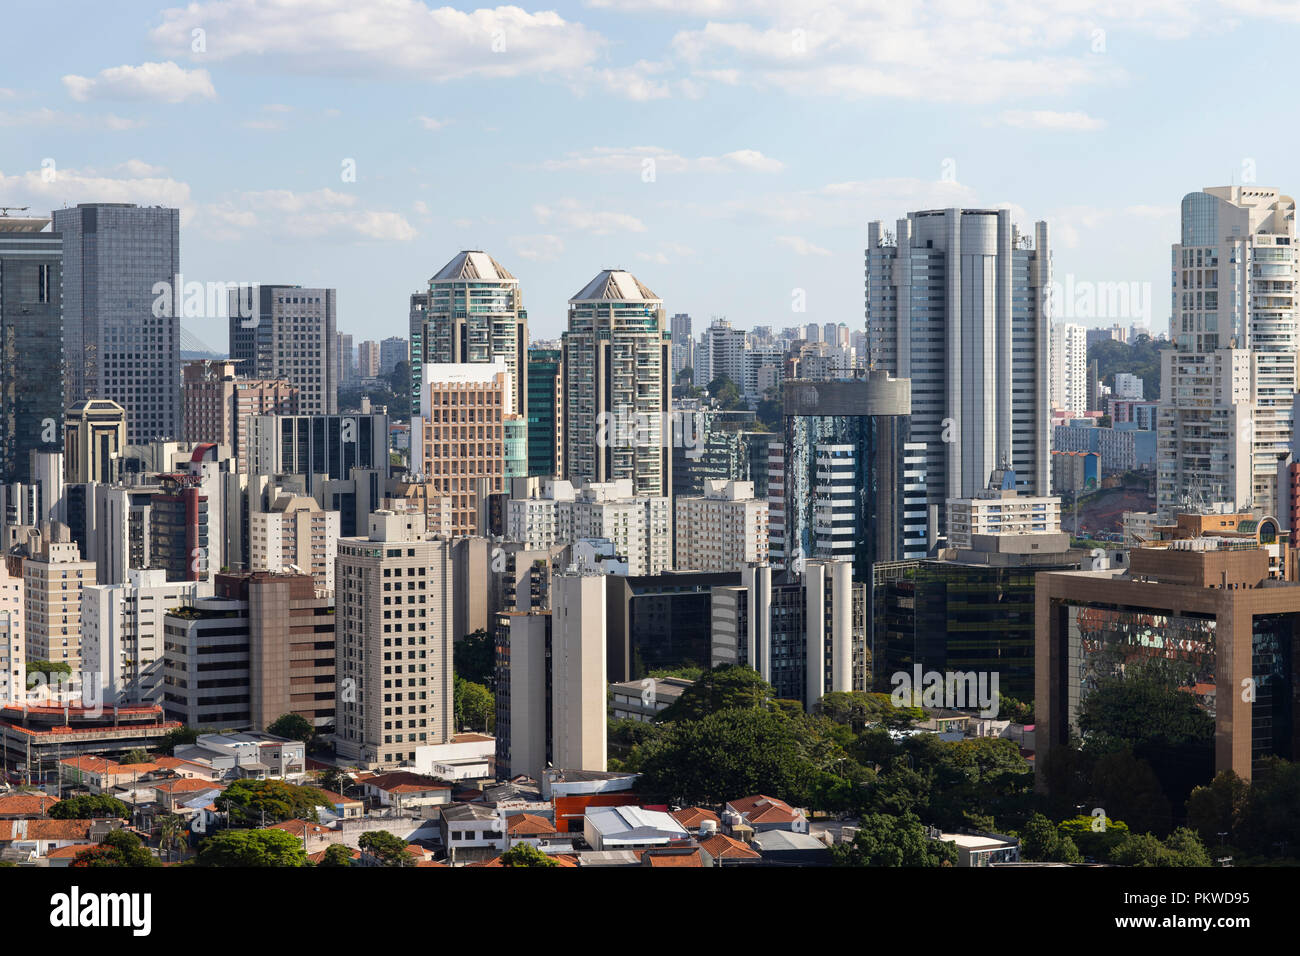 Large buildings in the big city. Sao Paulo state, Brazil in South America. Stock Photo